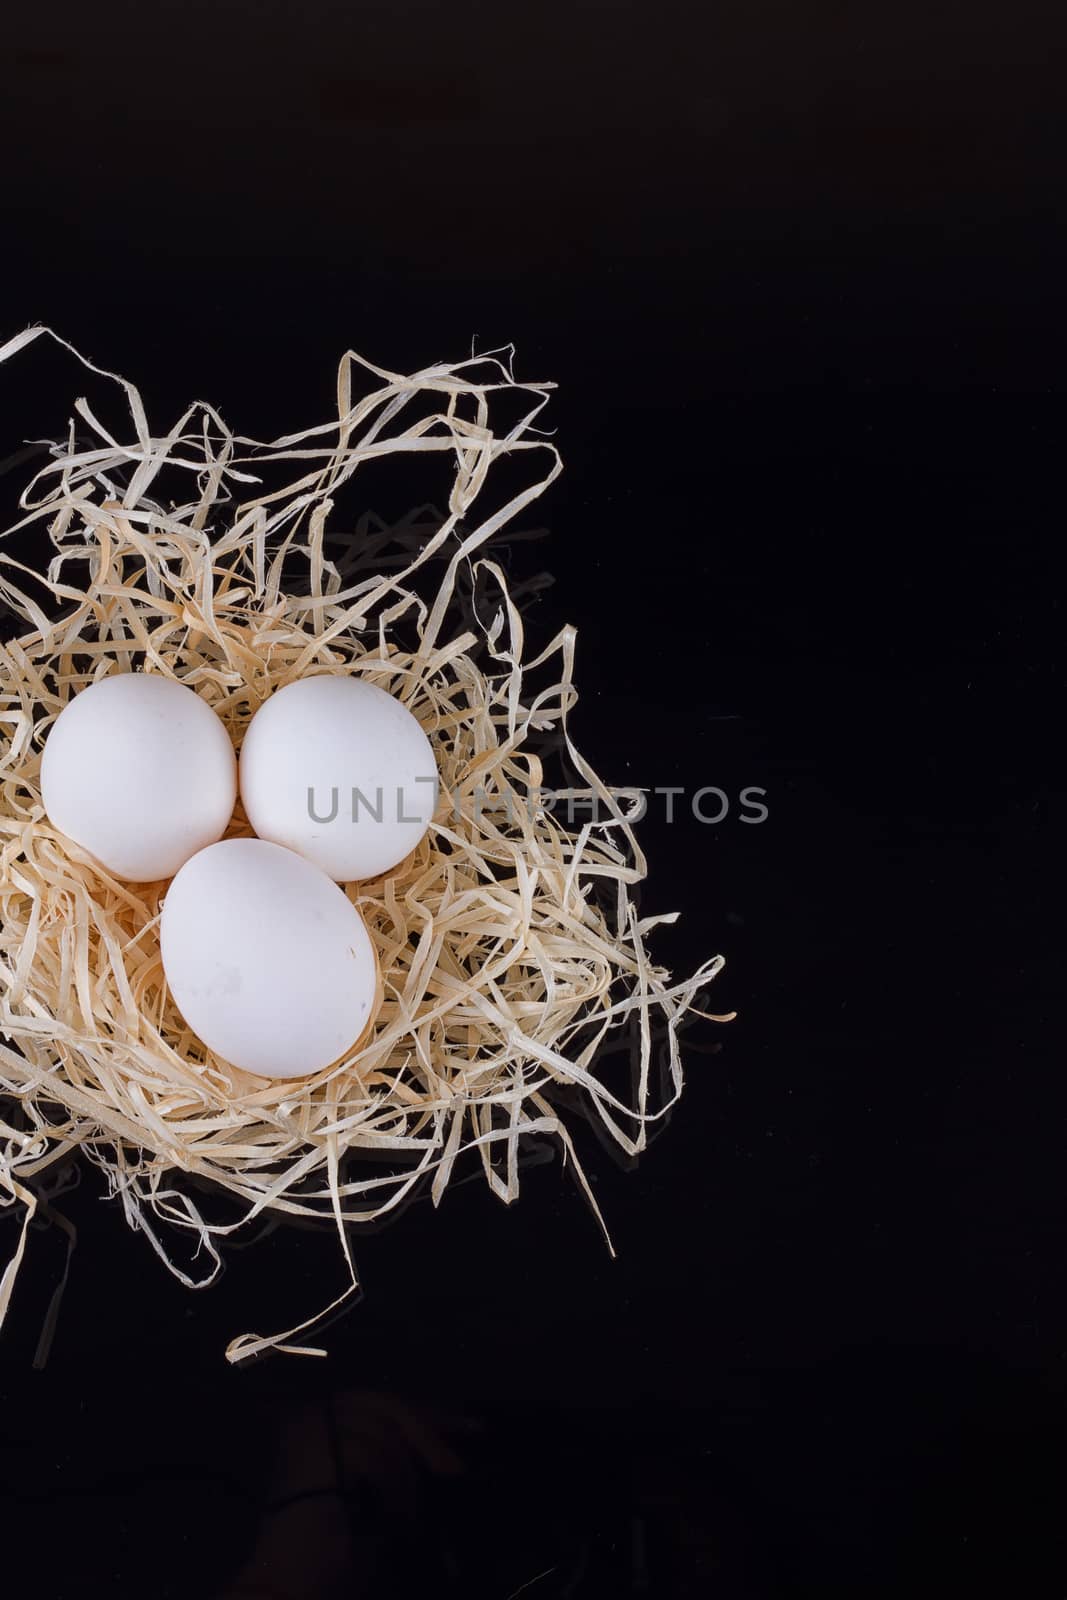 Three chicken eggs in the nest like On a black background